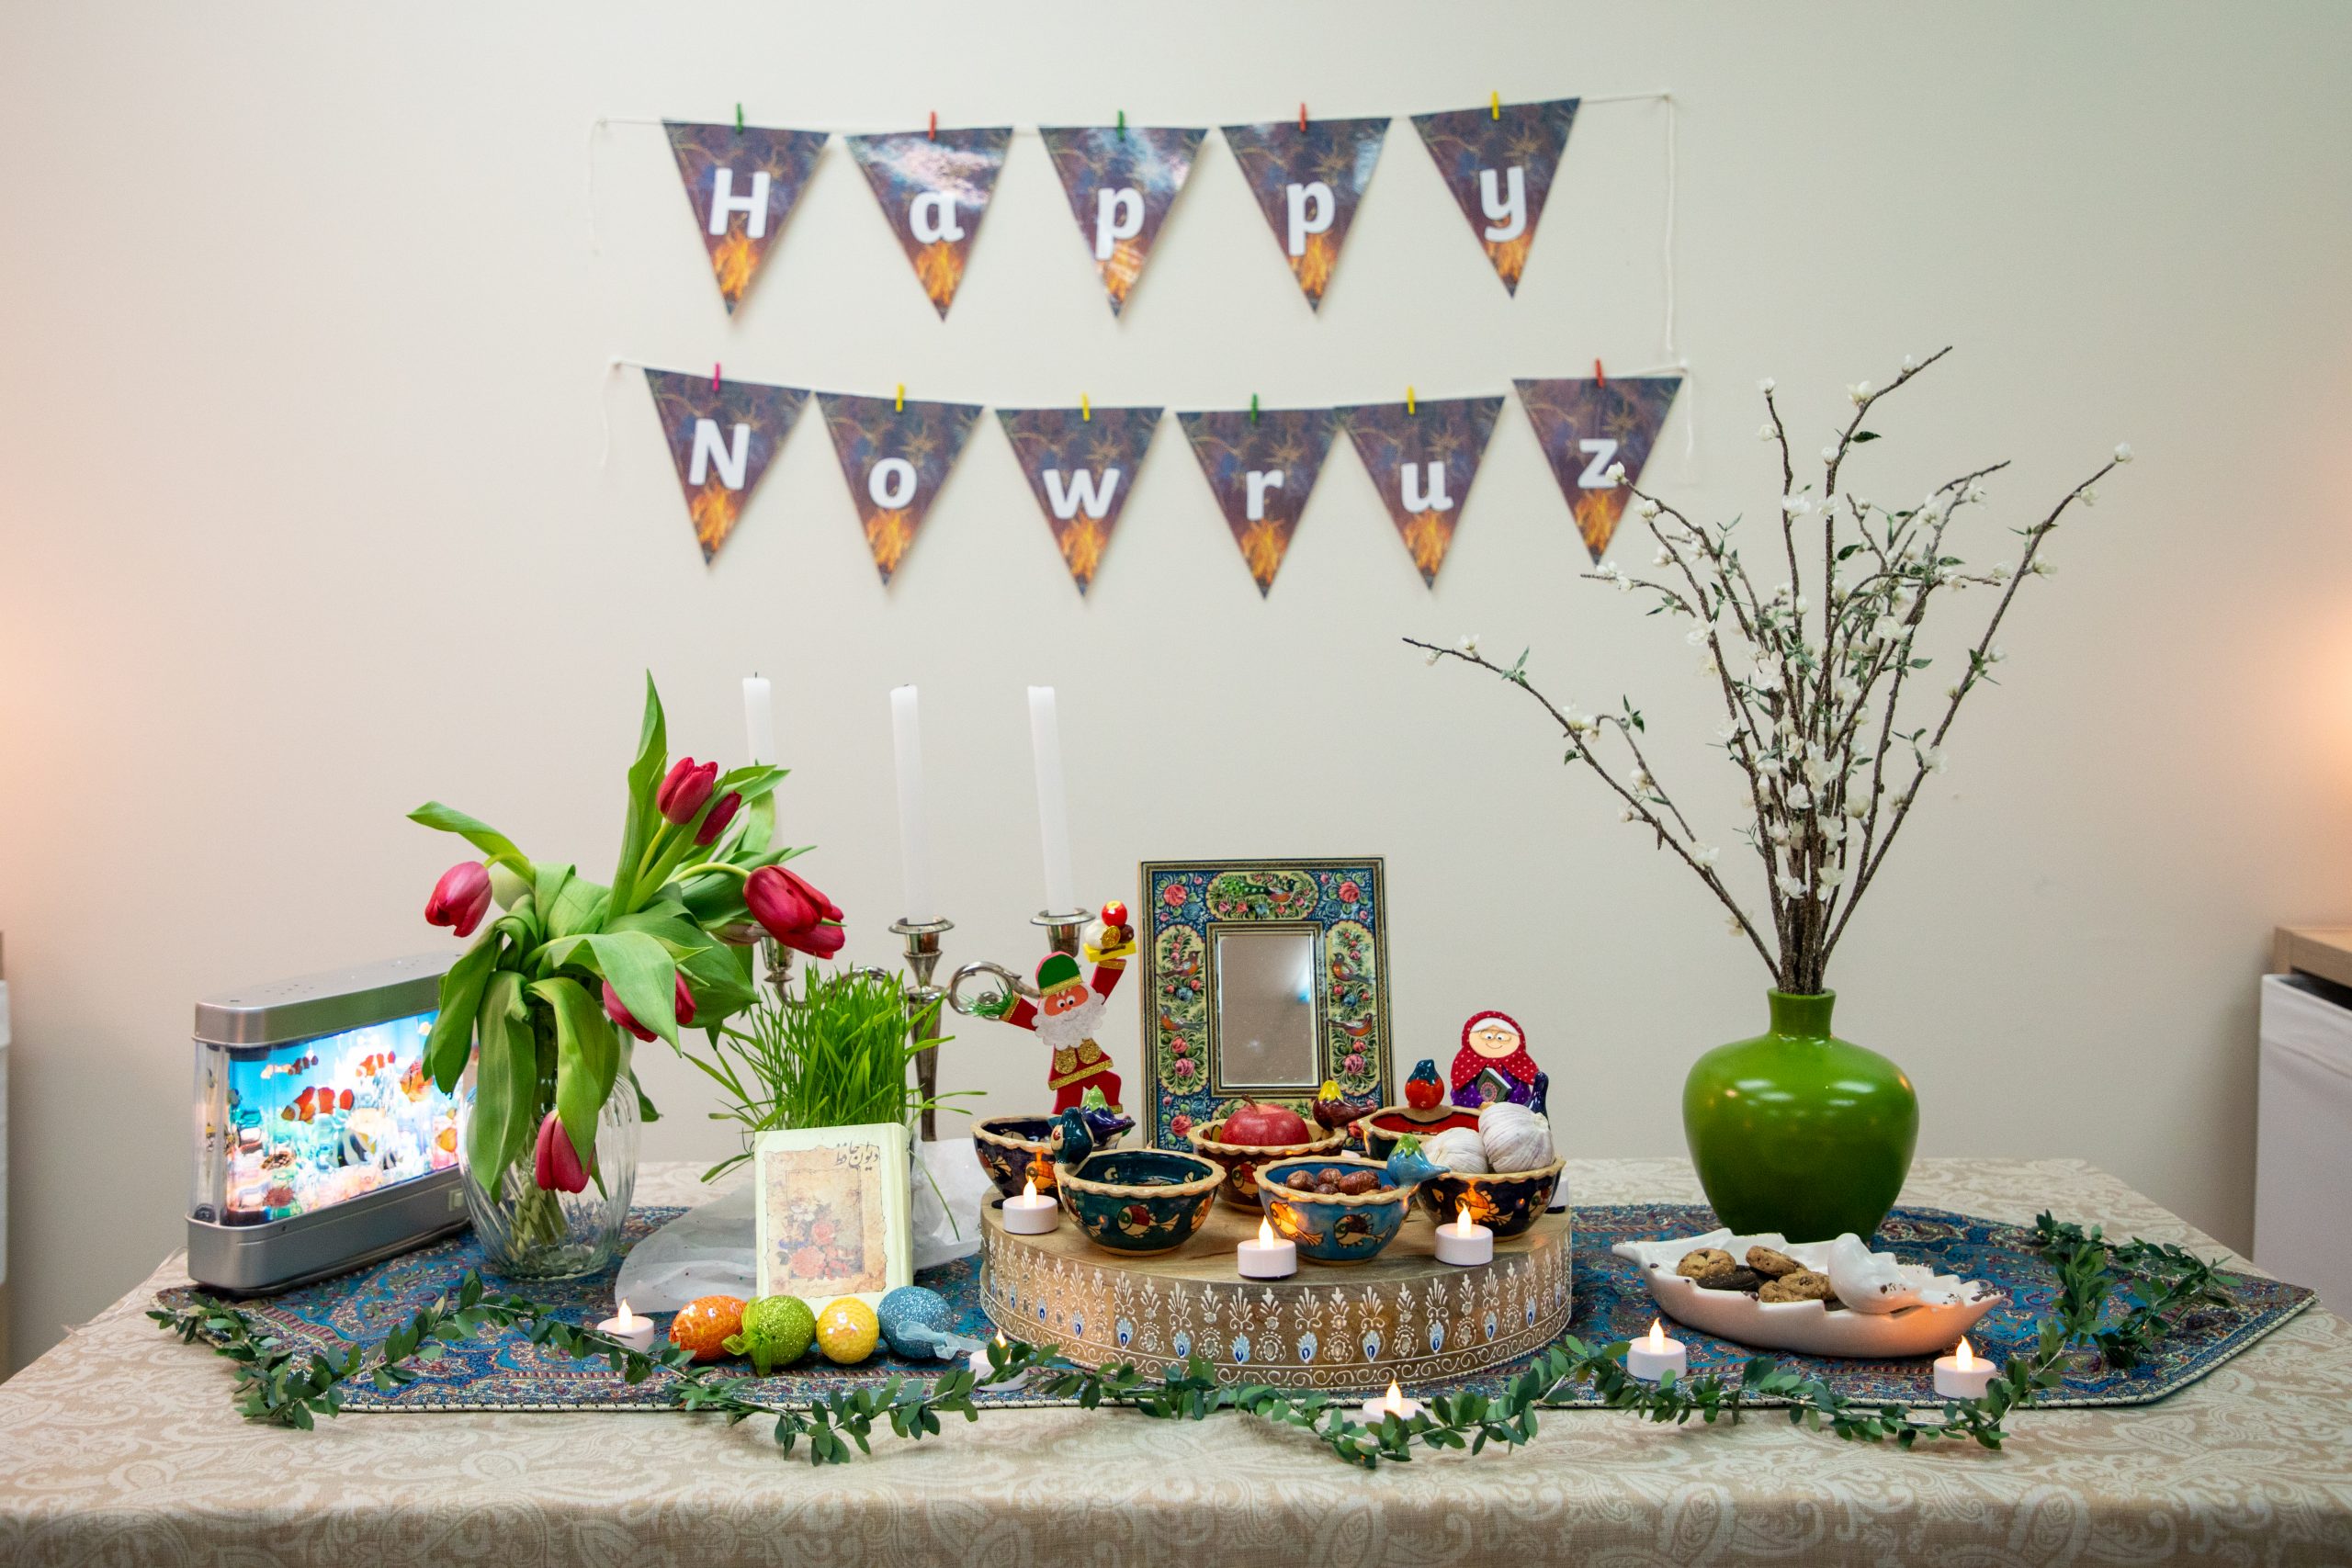 Haft-sin table with banner on the wall behind it that reads, "Happy Nowruz".